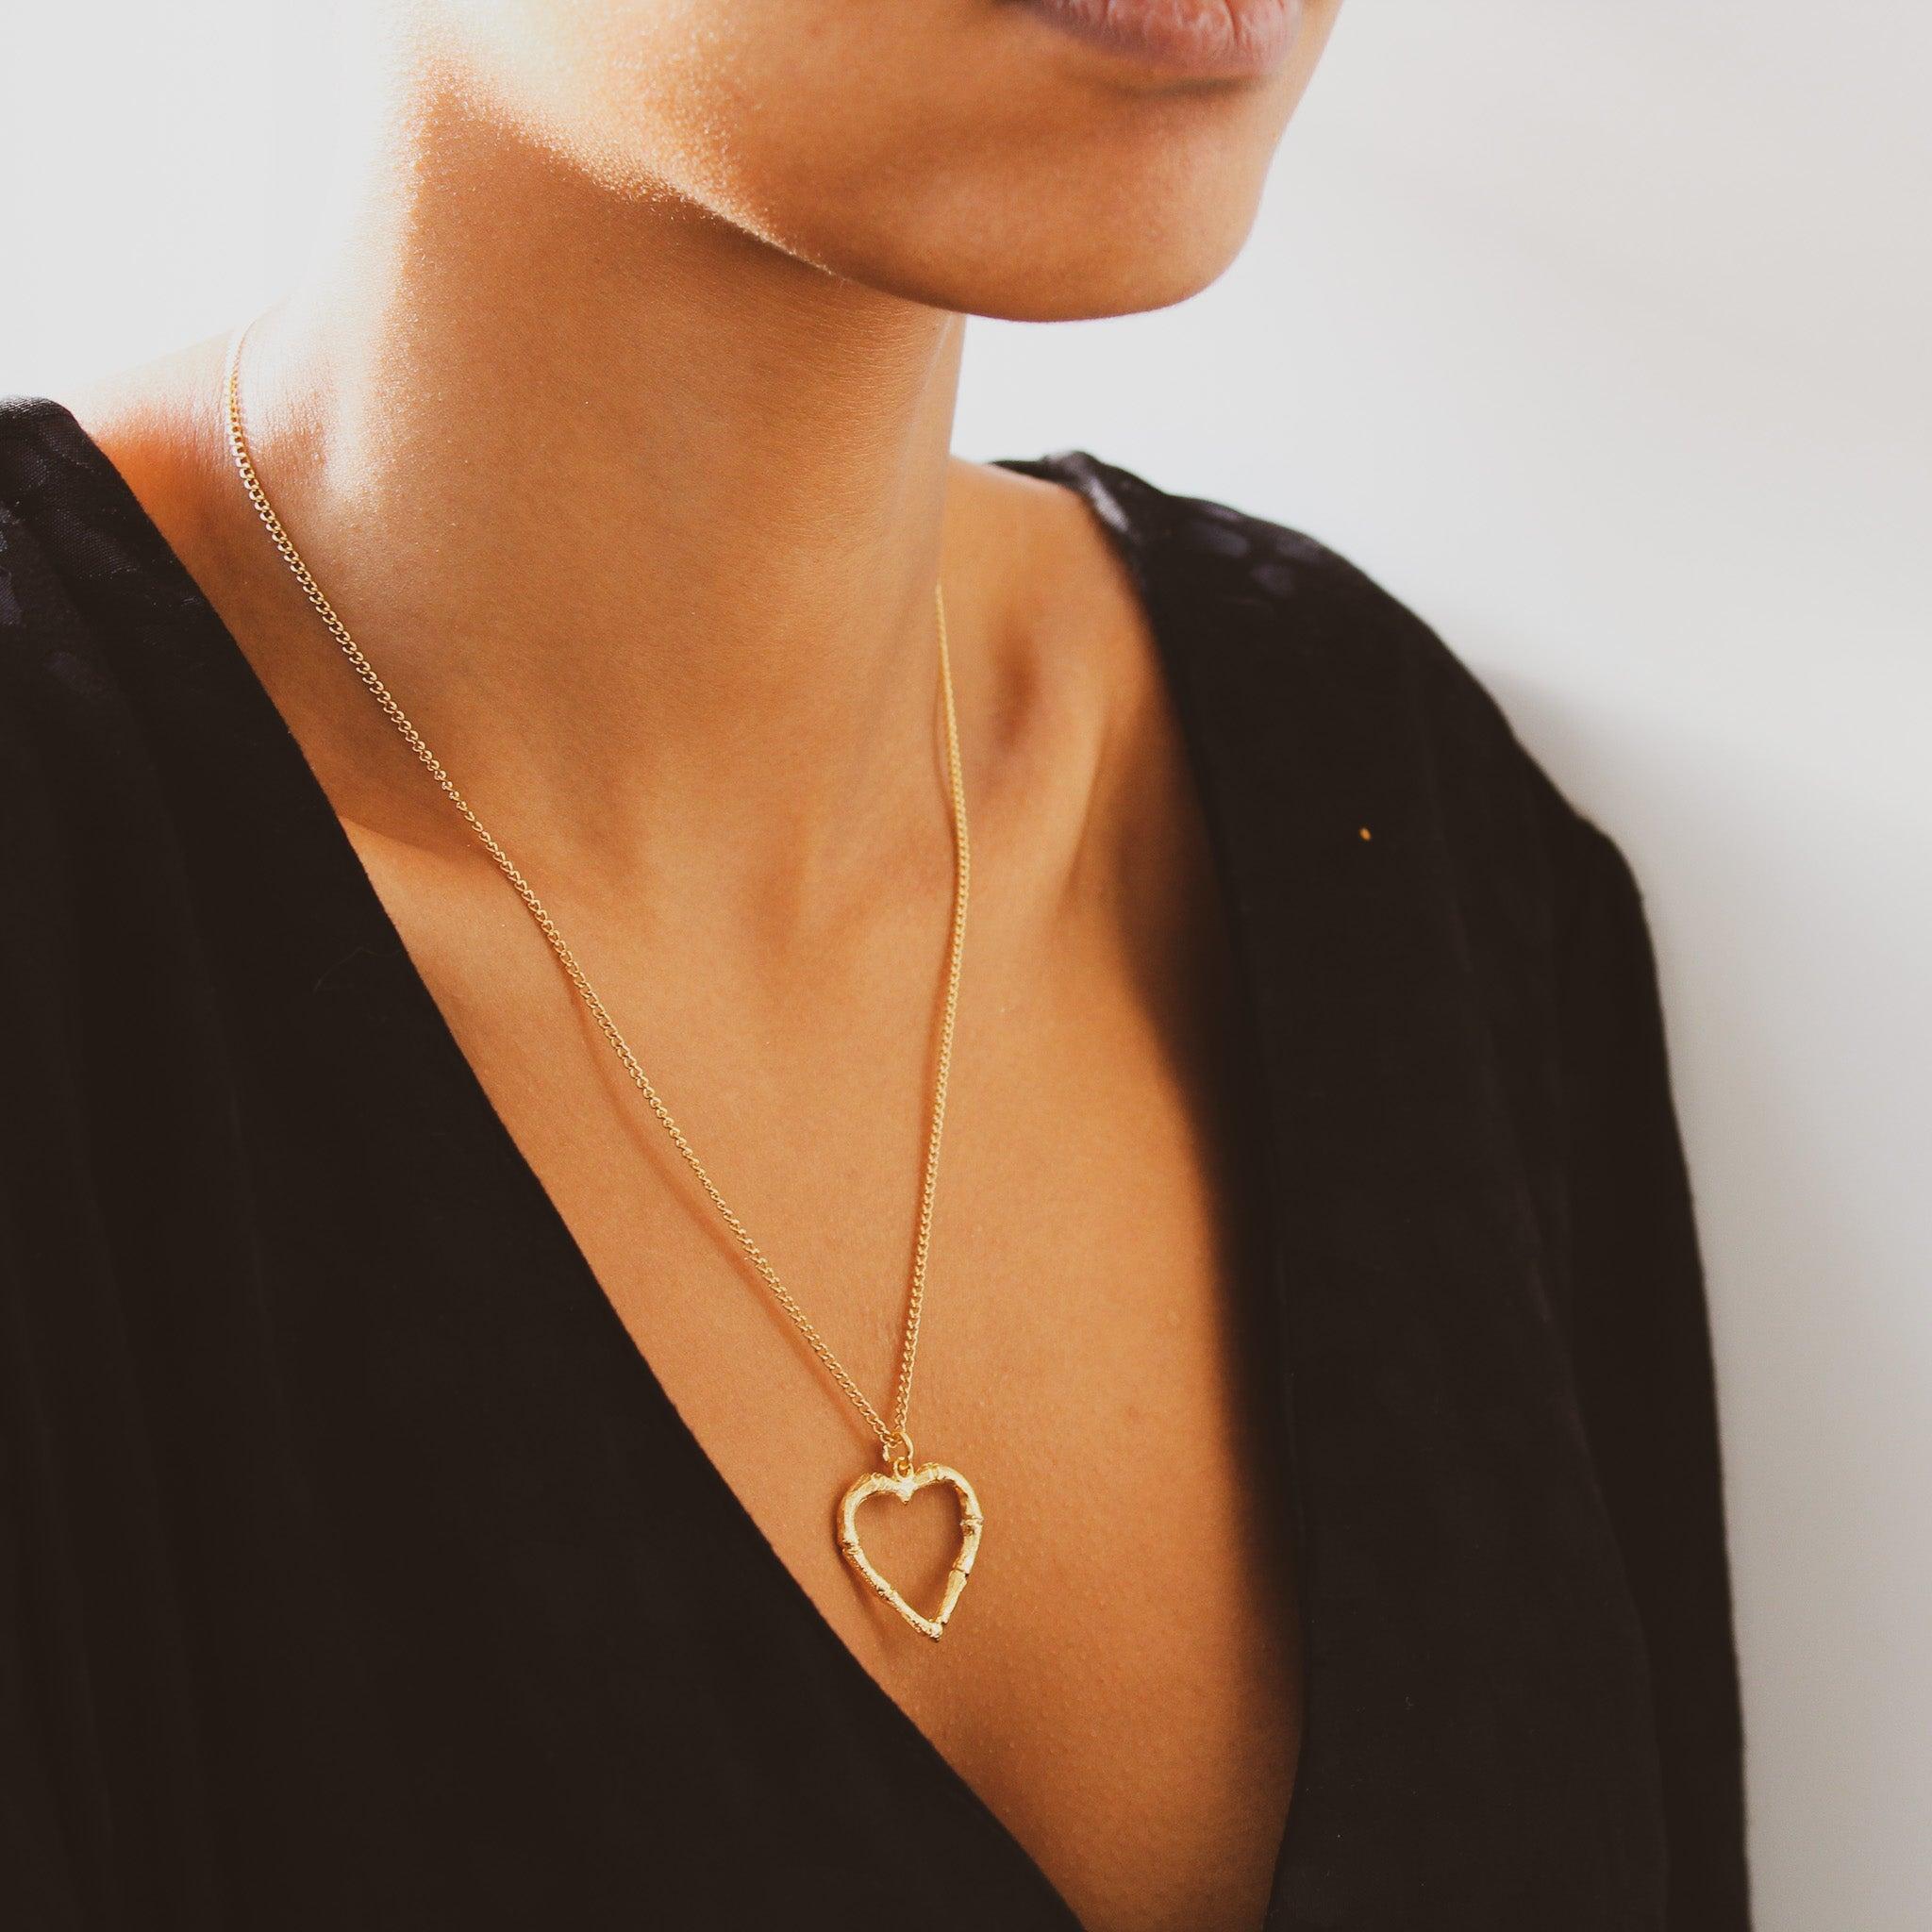 
Vintage 1980s Bamboo Heart Necklace
 

This vintage necklace features a delicate chain with a bamboo-shaped heart pendant. Made in the 1980s in the UK from high-quality 18 Carat gold plated metal.

This necklace is a deadstock item, meaning it was